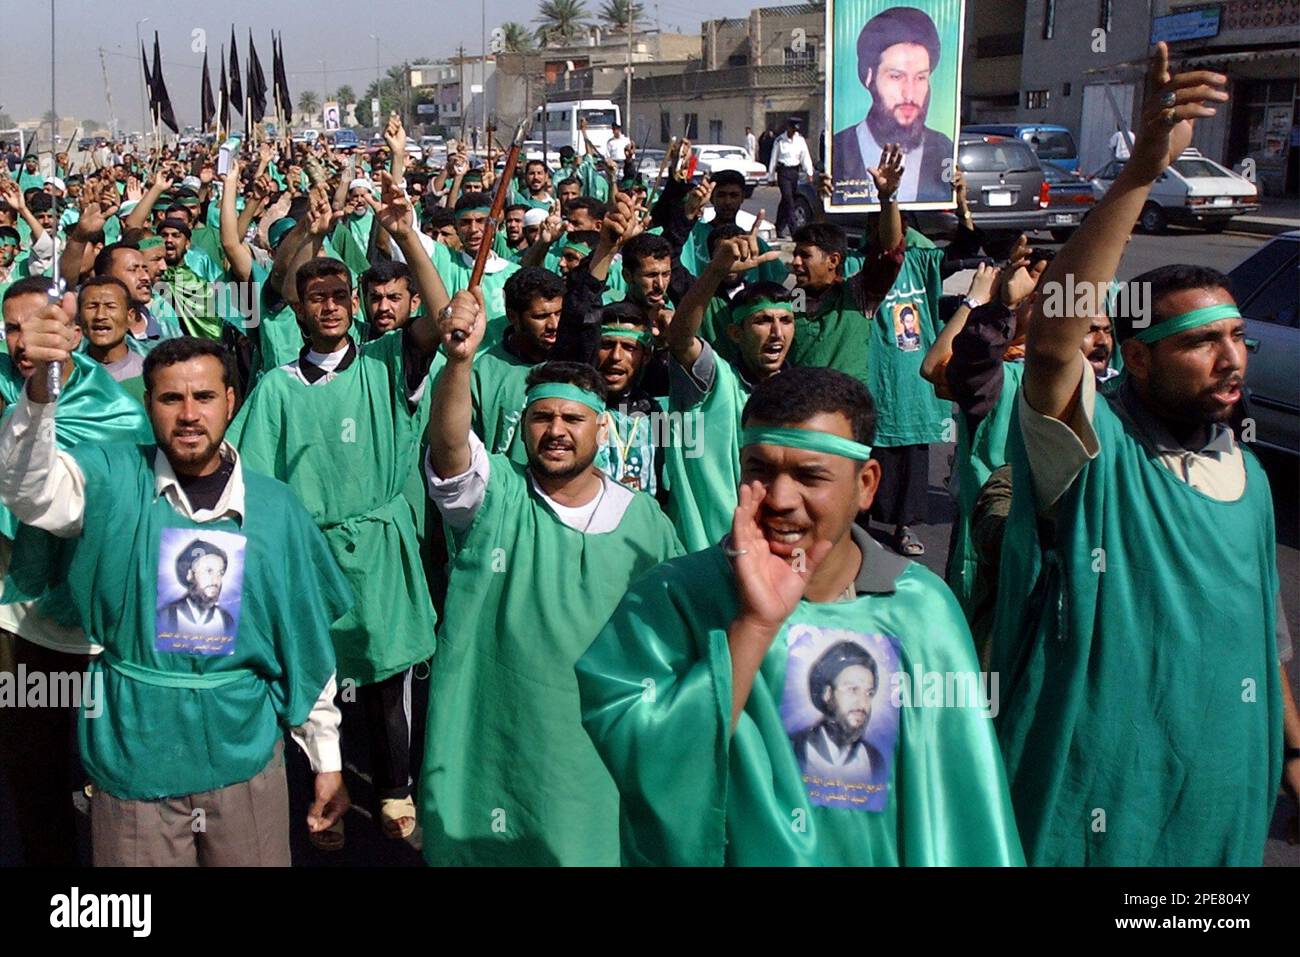 Shiite Iraqis protest against the U.S. military presence in Iraq during a demonstration in Baghdad, Iraq Monday, April 18, 2005. They carry and bear photos of Shiite Ayatollah Mahmoud al-Hassani, who called for the protest.(AP Photo/Mohammed Uraibi) Stock Photo